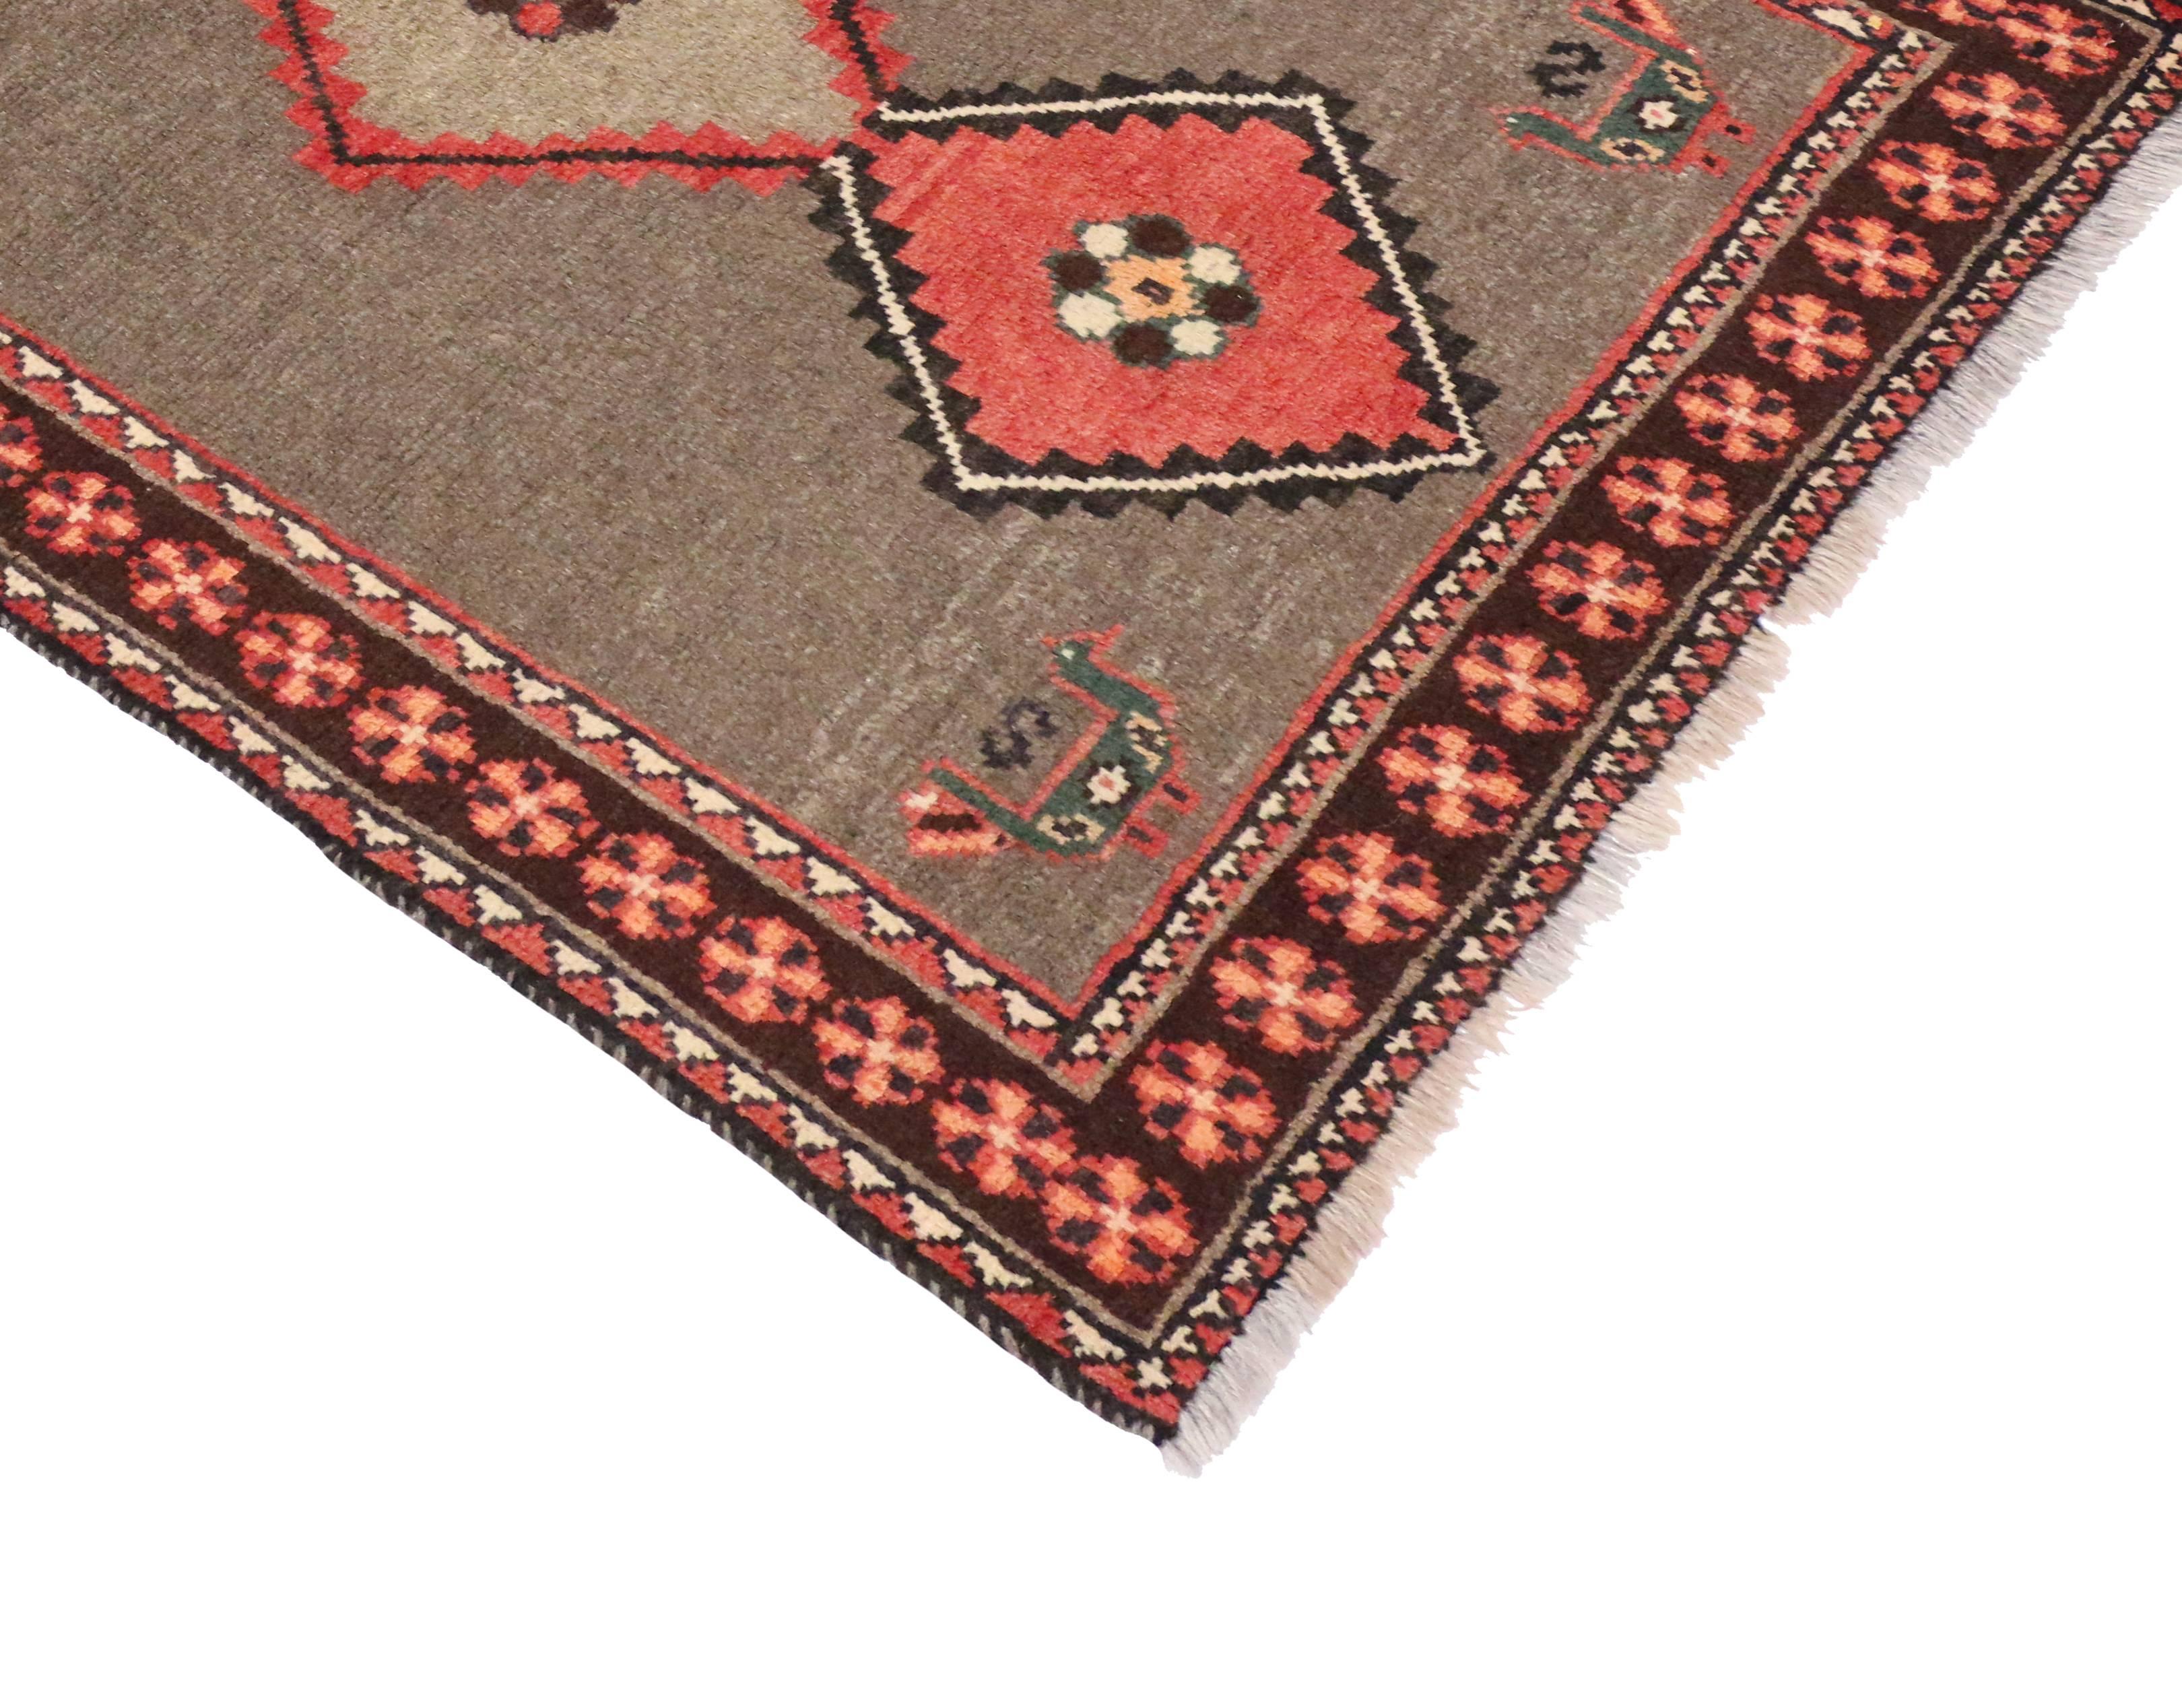 20th Century Vintage Persian Shiraz Rug with Modern Tribal Style